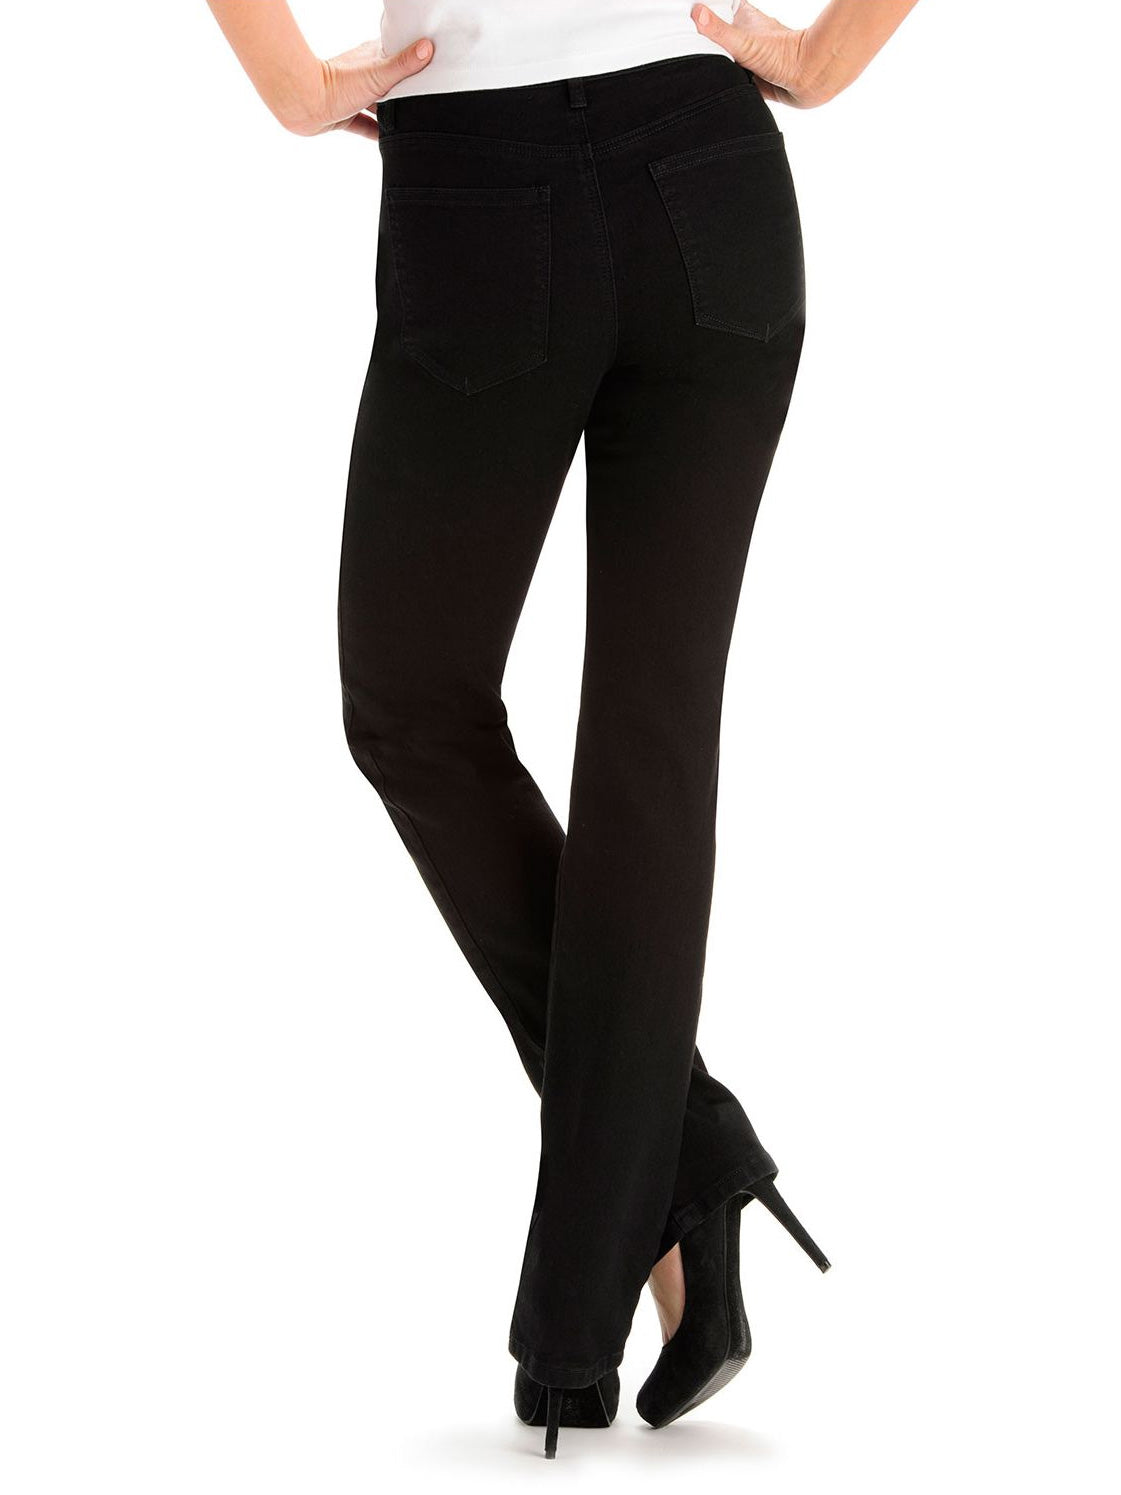 Instantly Slims Classic Relaxed Fit Straight Leg Jean - Black